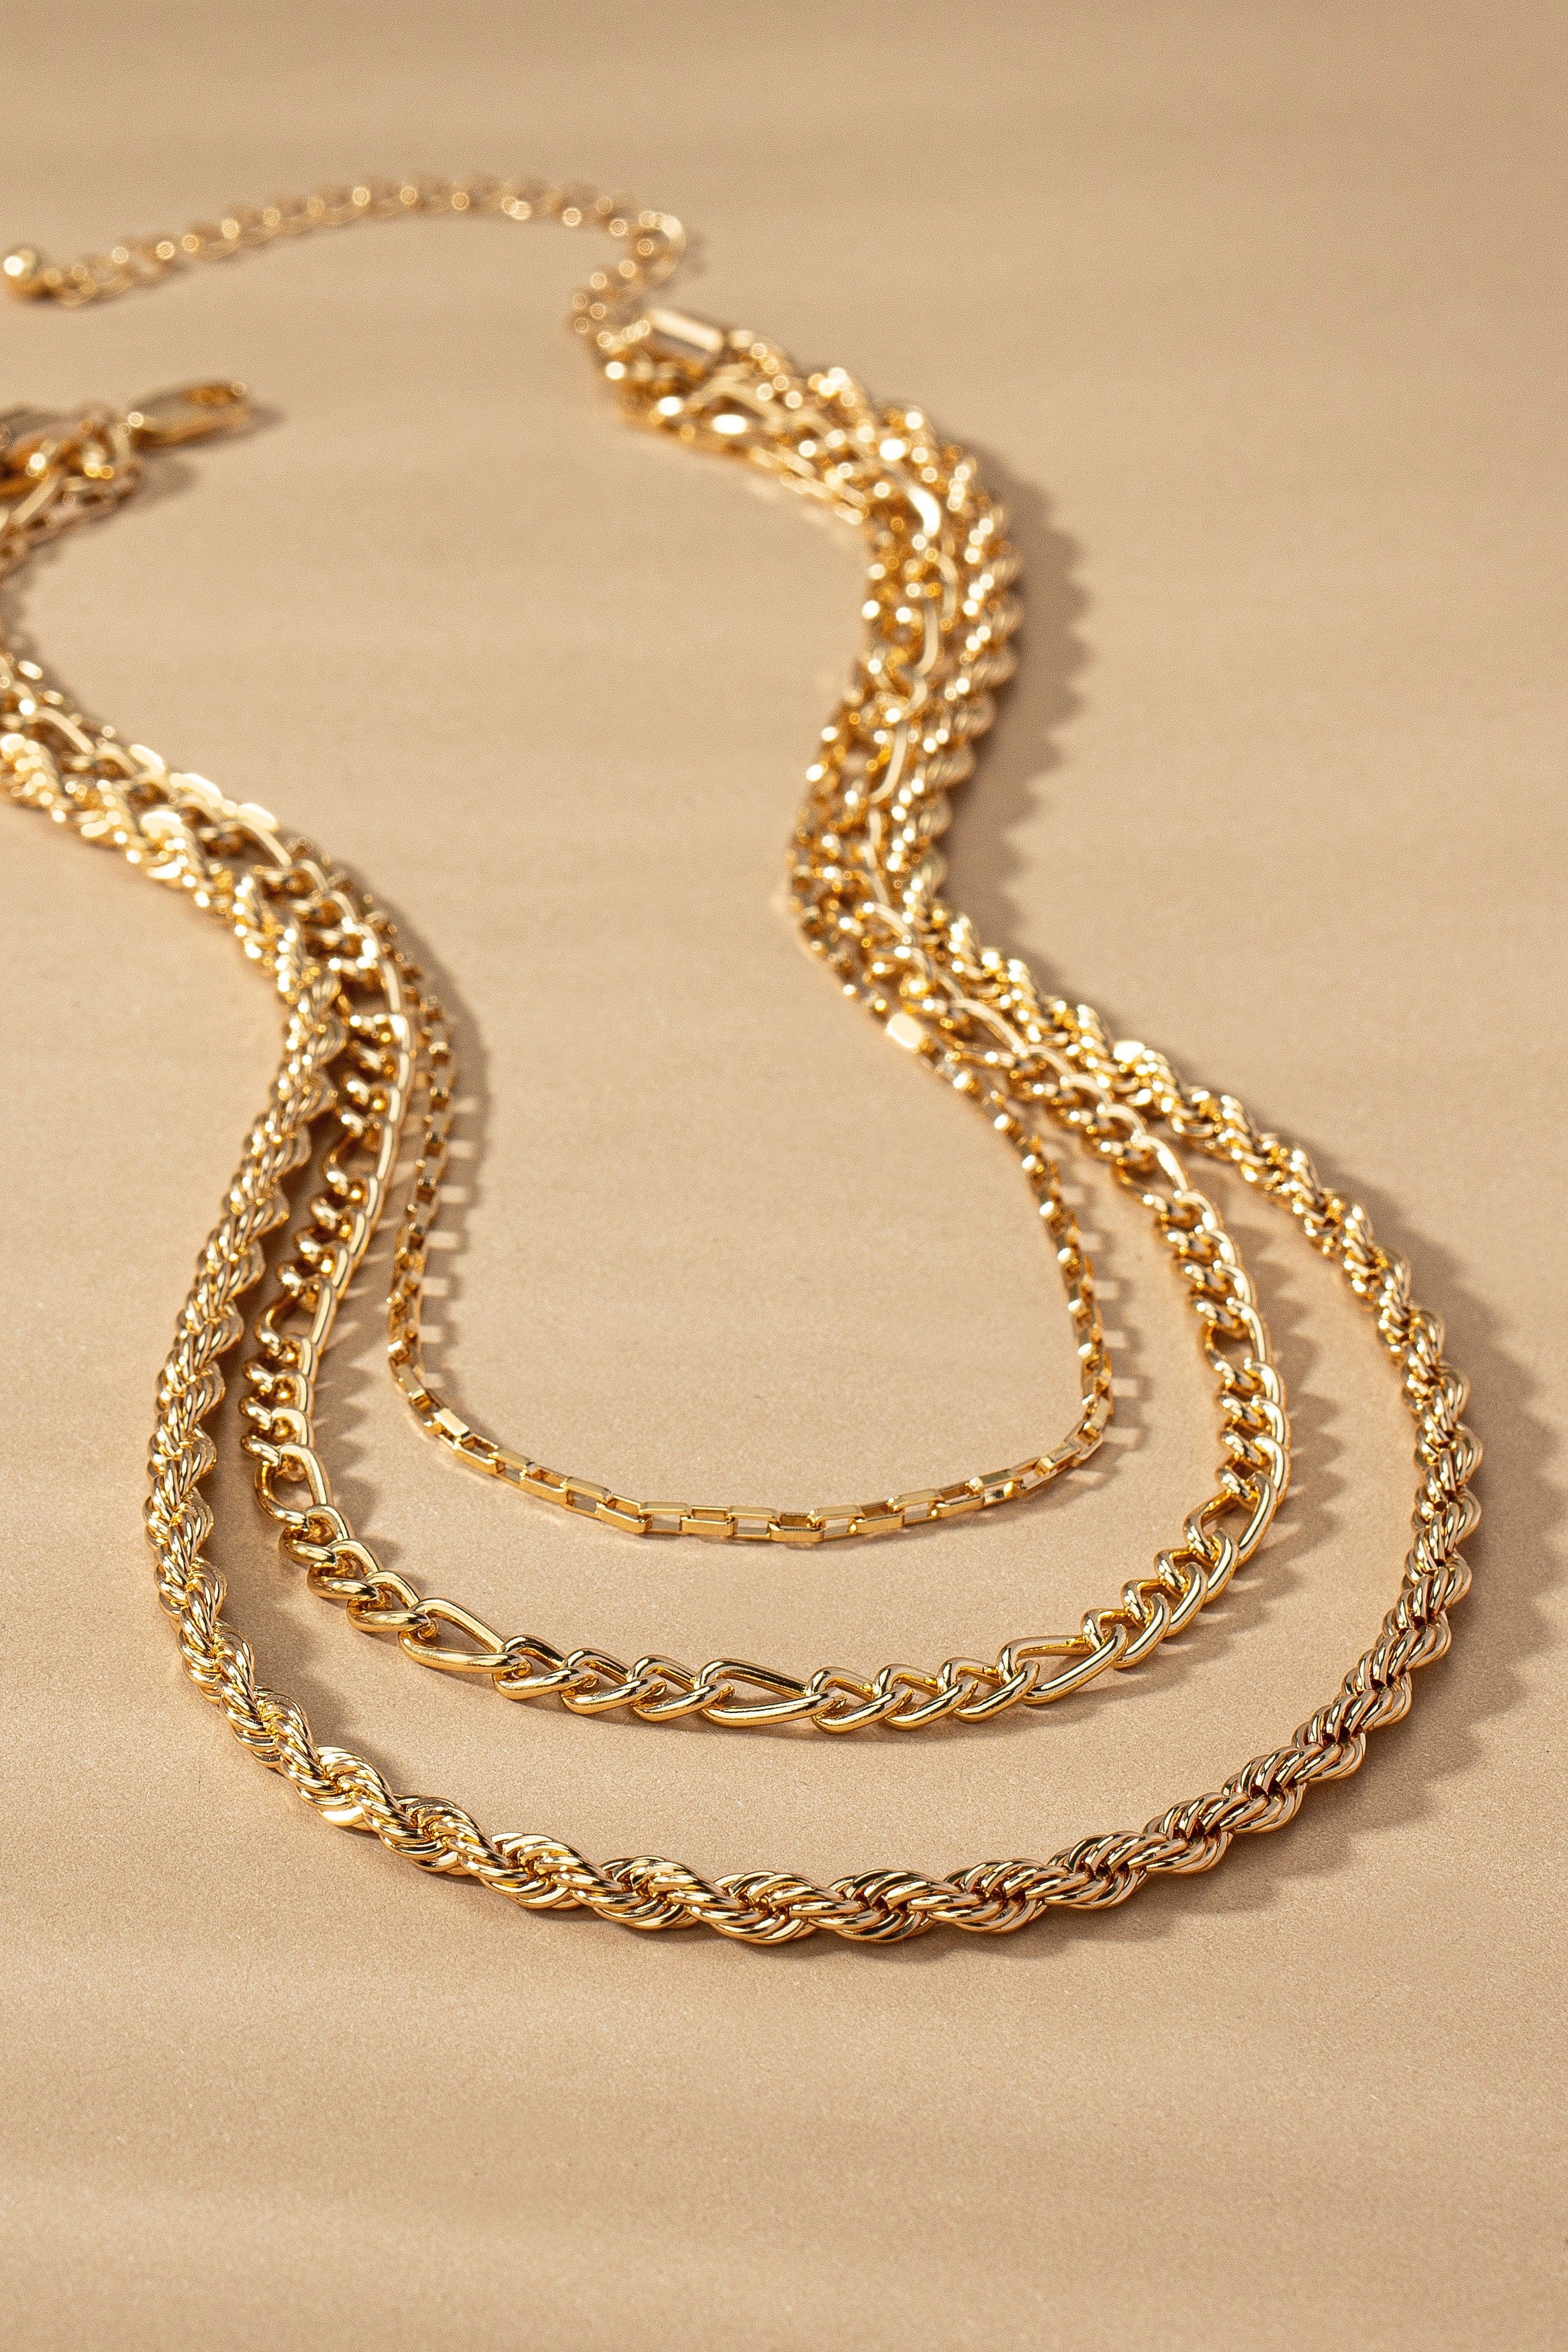 LA3accessories Jewelry - Necklaces Mixed Chain Layered Necklace In Gold 14172150